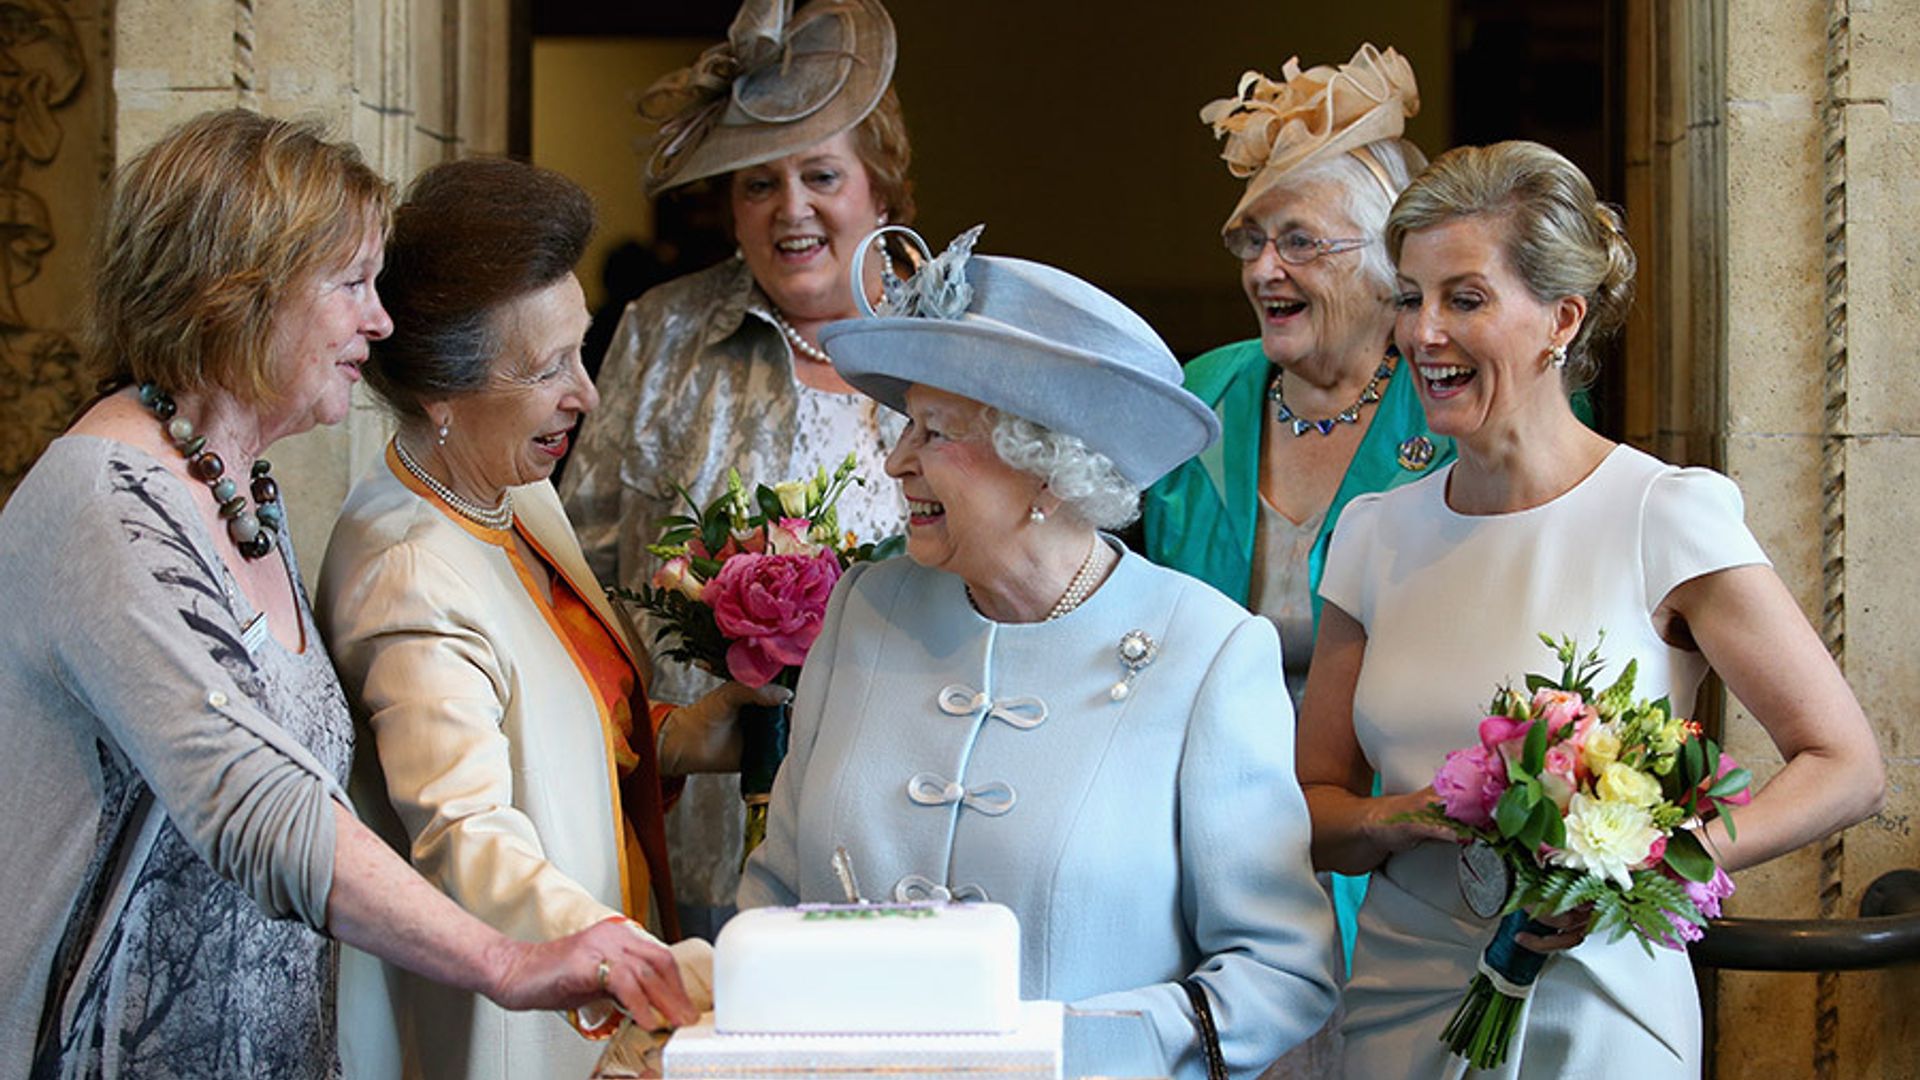 Queen Elizabeth all smiles at WI event following rumored health scare